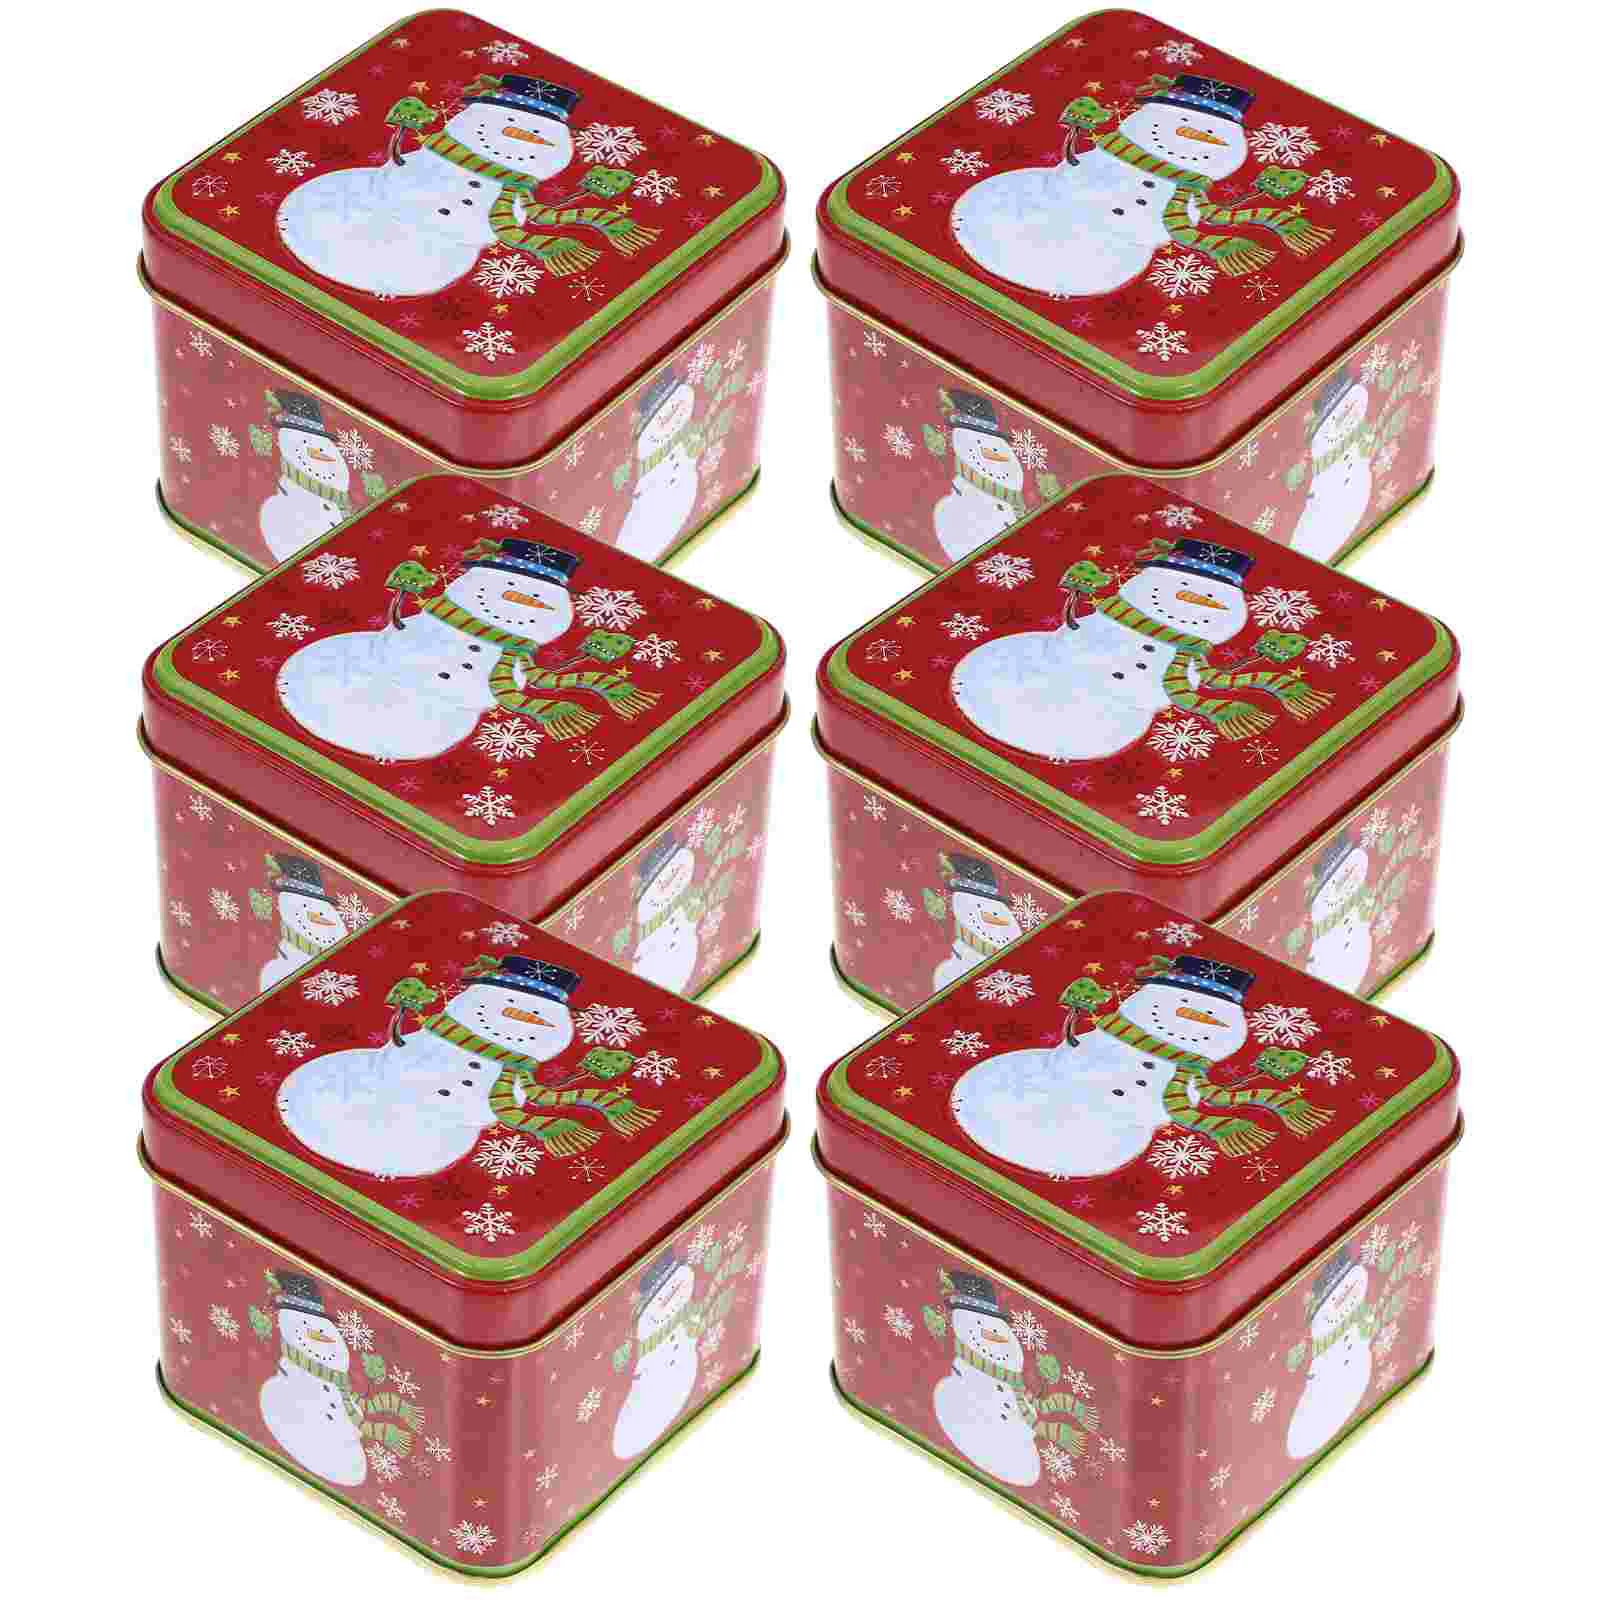 

6 Pcs Decorate Cookie Tins Lids Sweet Container Christmas Supplies Candy Containers Storage Holder Sugar Case Jar